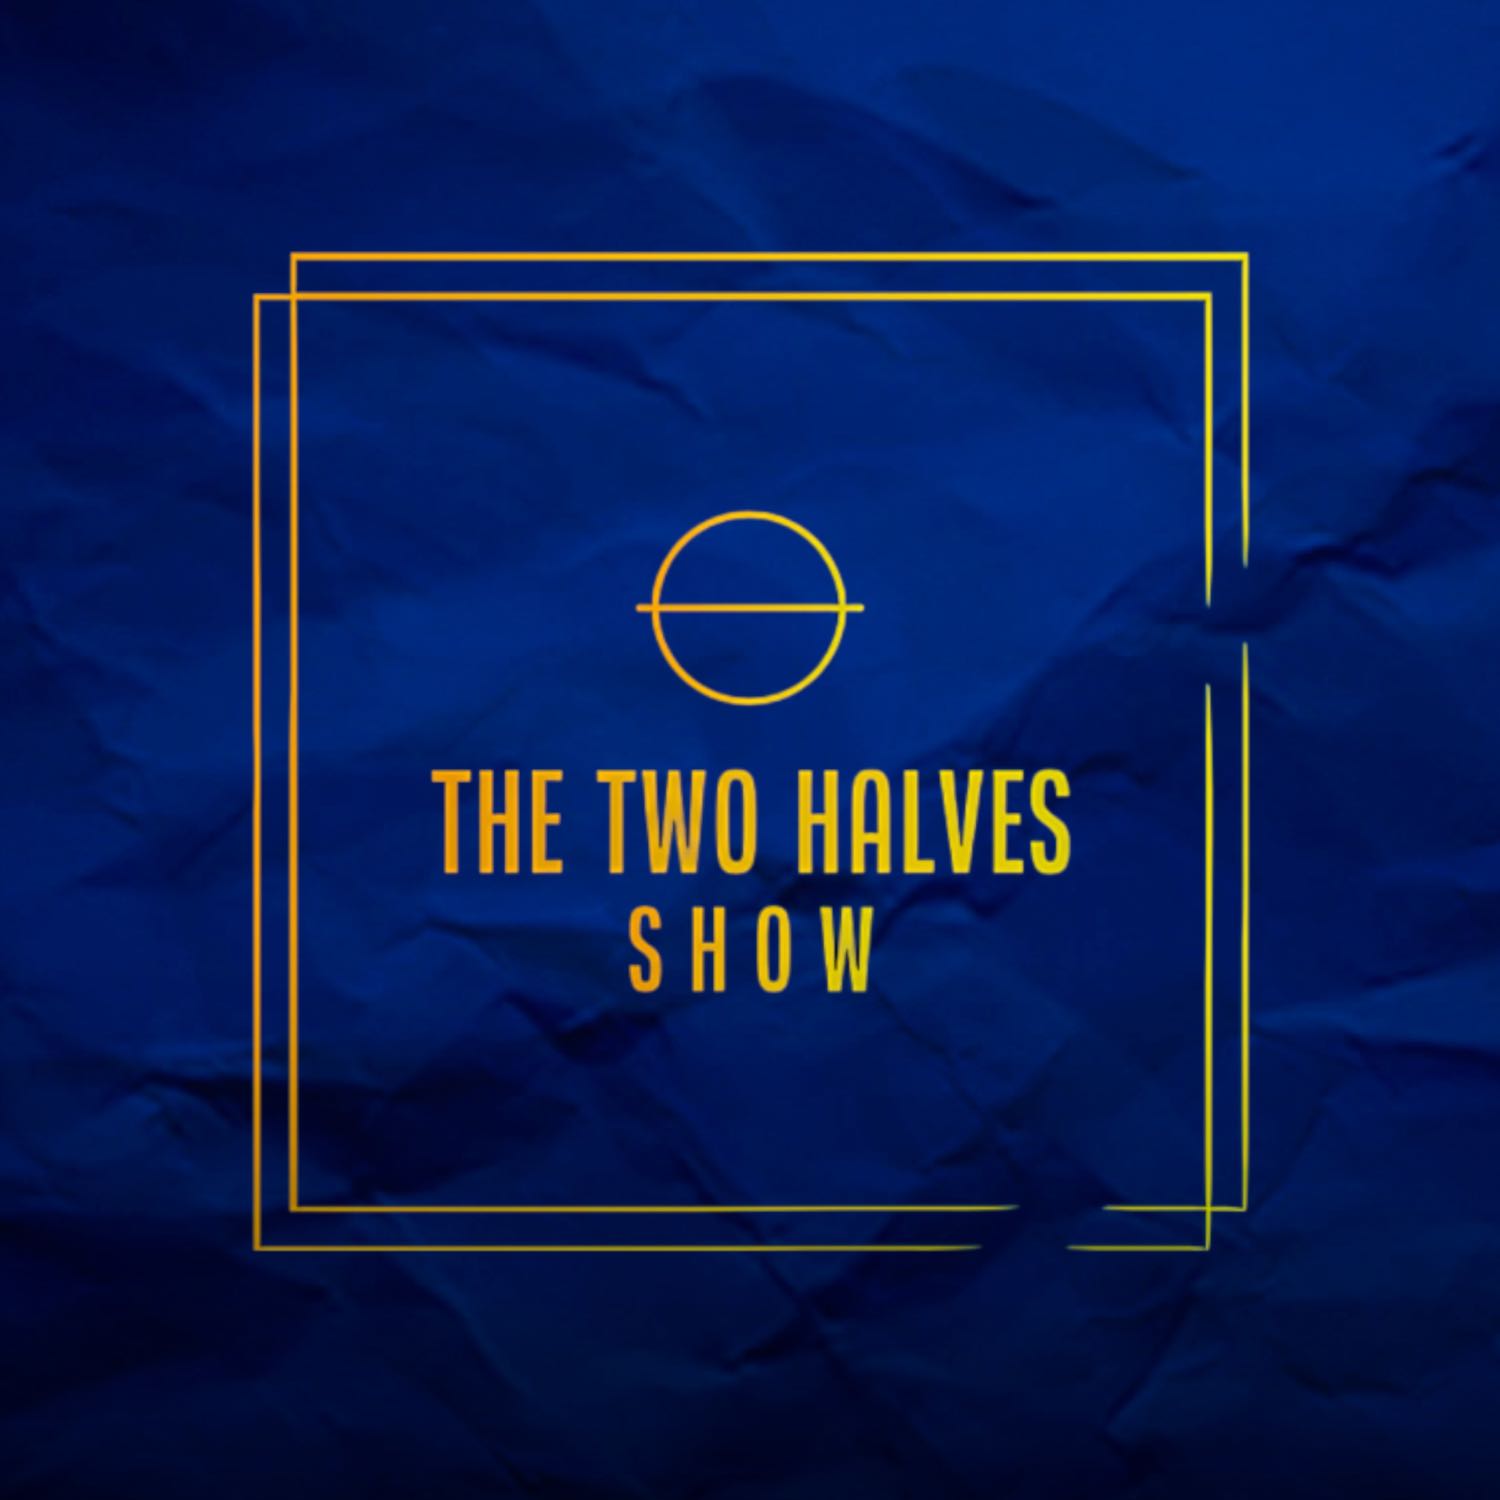 The Two Halves Show - Transfer Window Shuts! | Chelsea's History Window | Super Bowl Matchup is set!